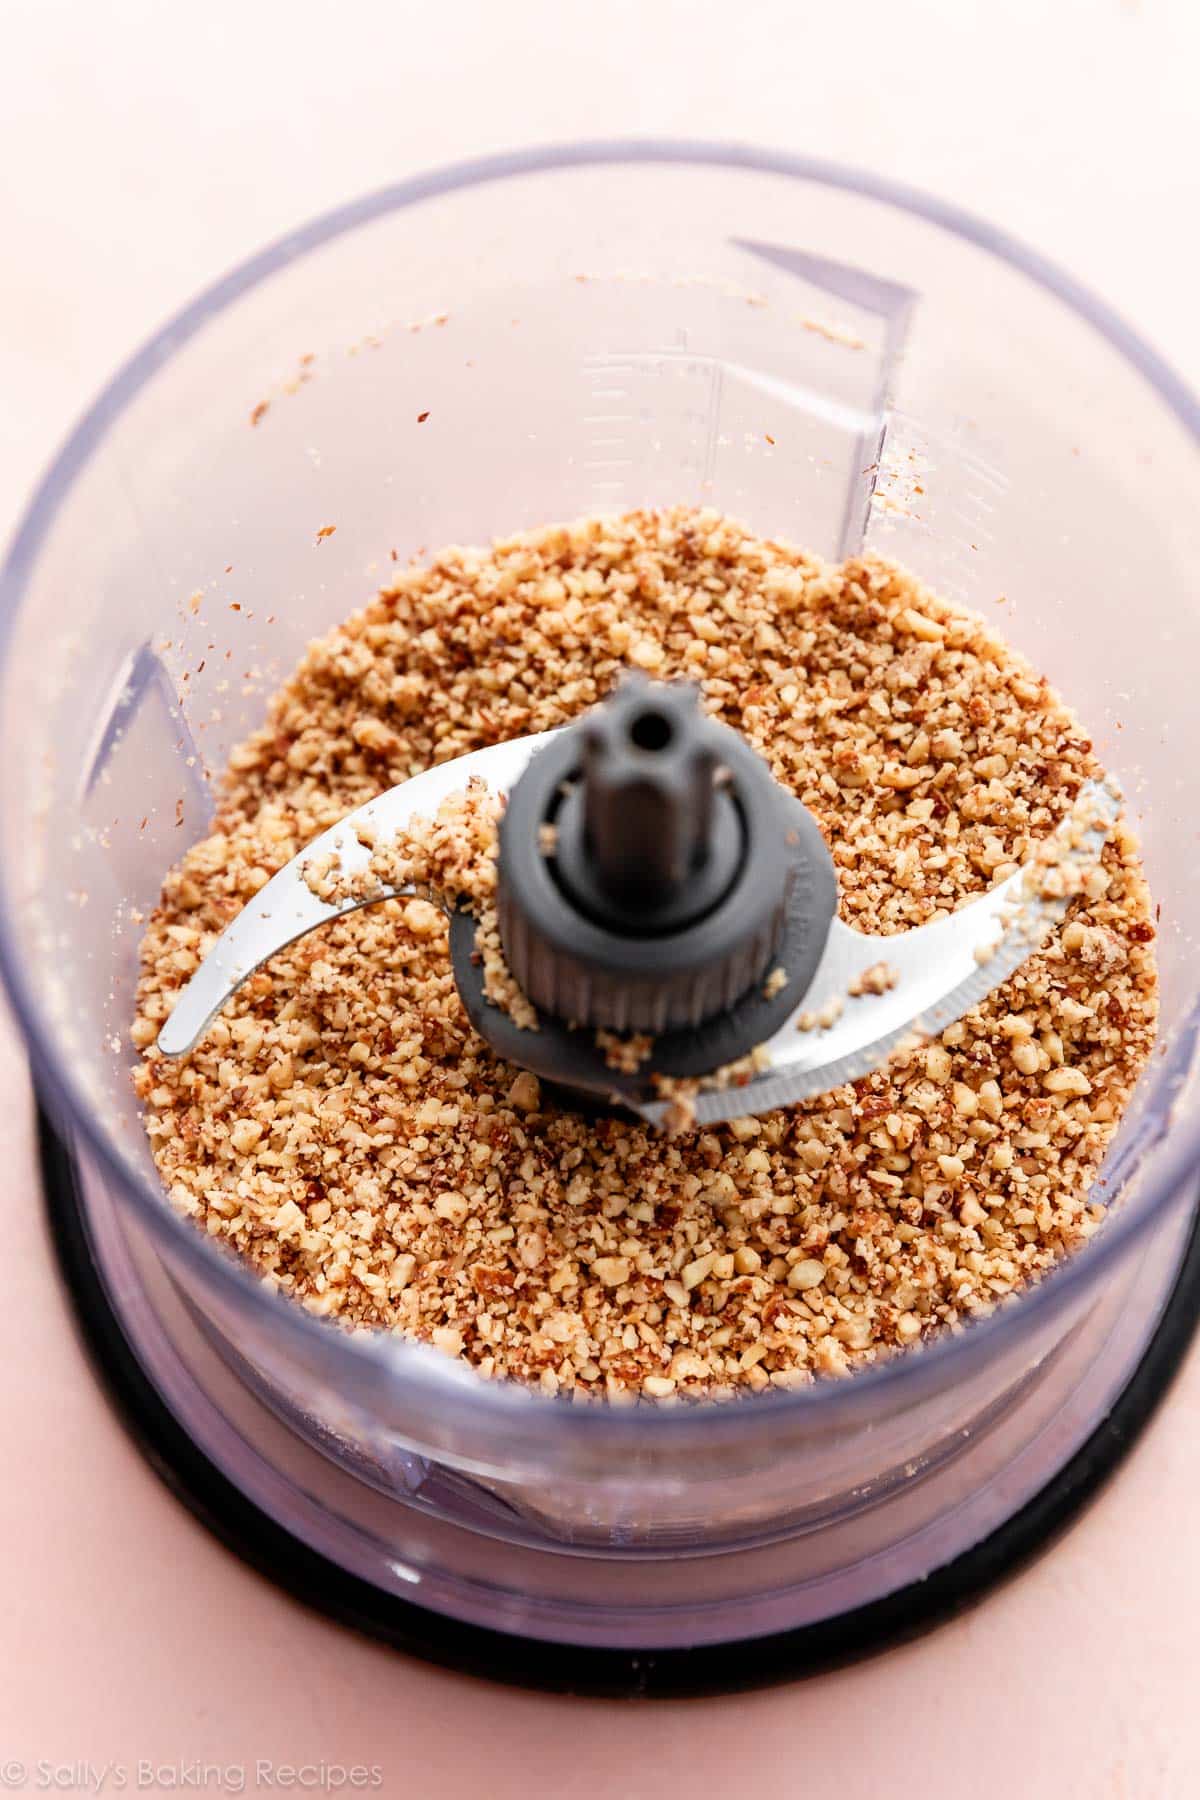 crushed almonds in small food processor.